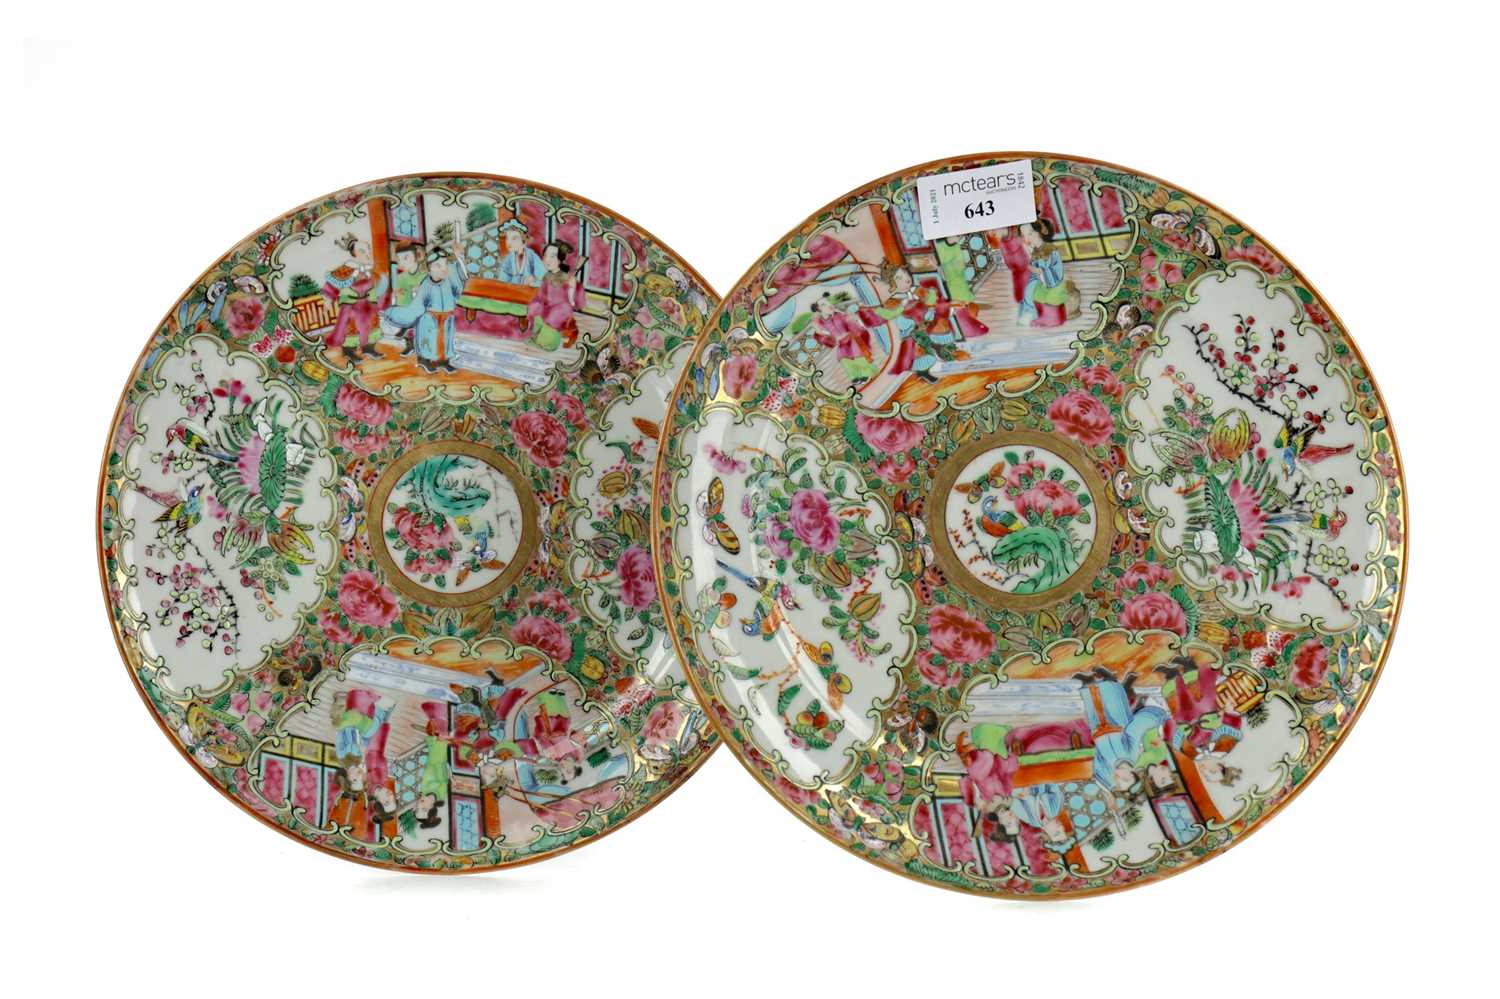 Lot 643 - A PAIR OF EARLY 20TH CENTURY CHINESE CANTON FAMILLE ROSE PLATES